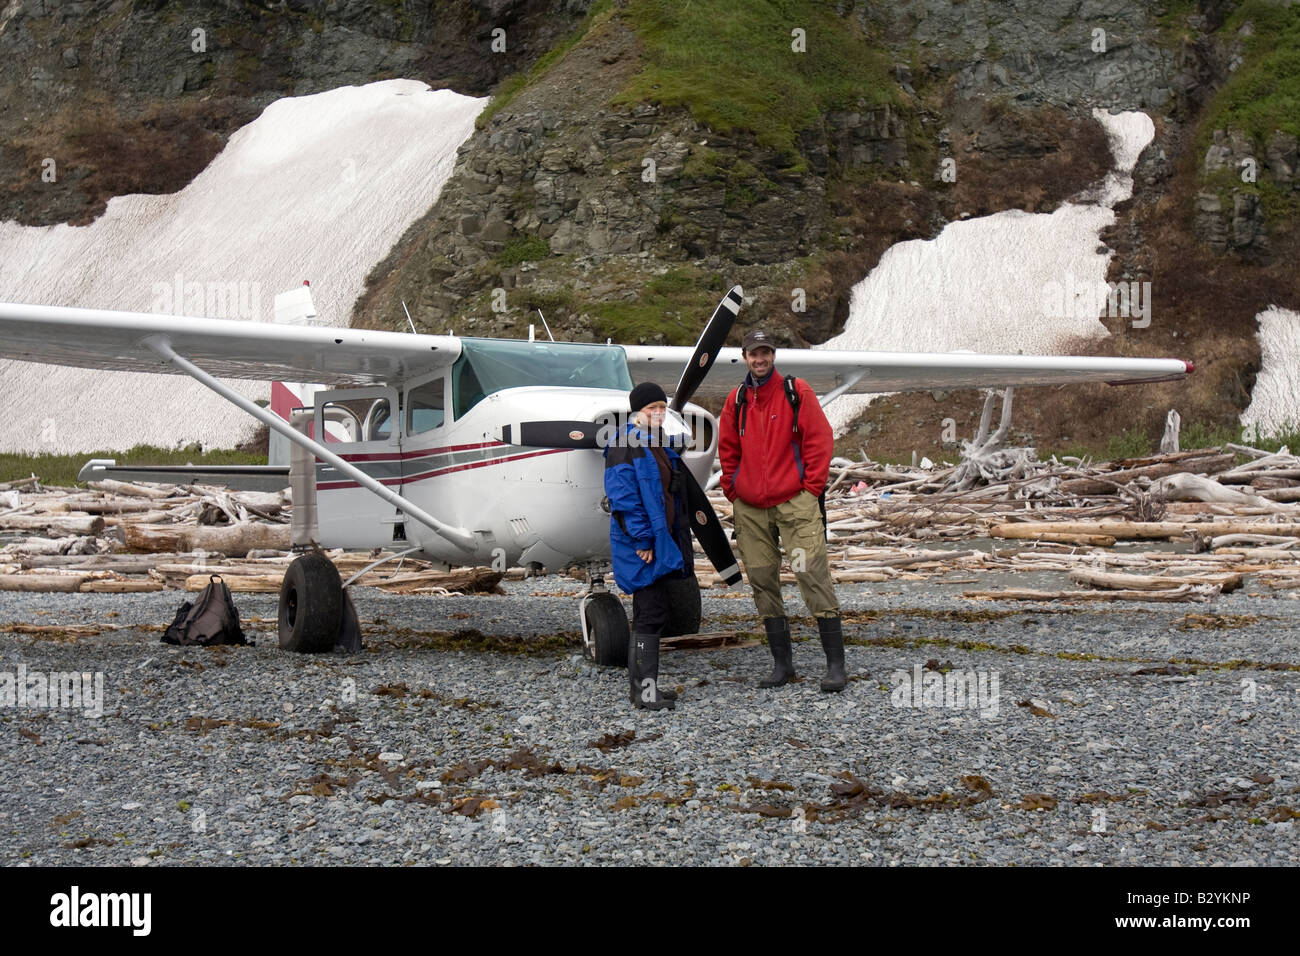 Tourists standing in front of an air plane (Cessna 2007) on the beach of the Katmai National Park and Preserve, Alaska, USA Stock Photo